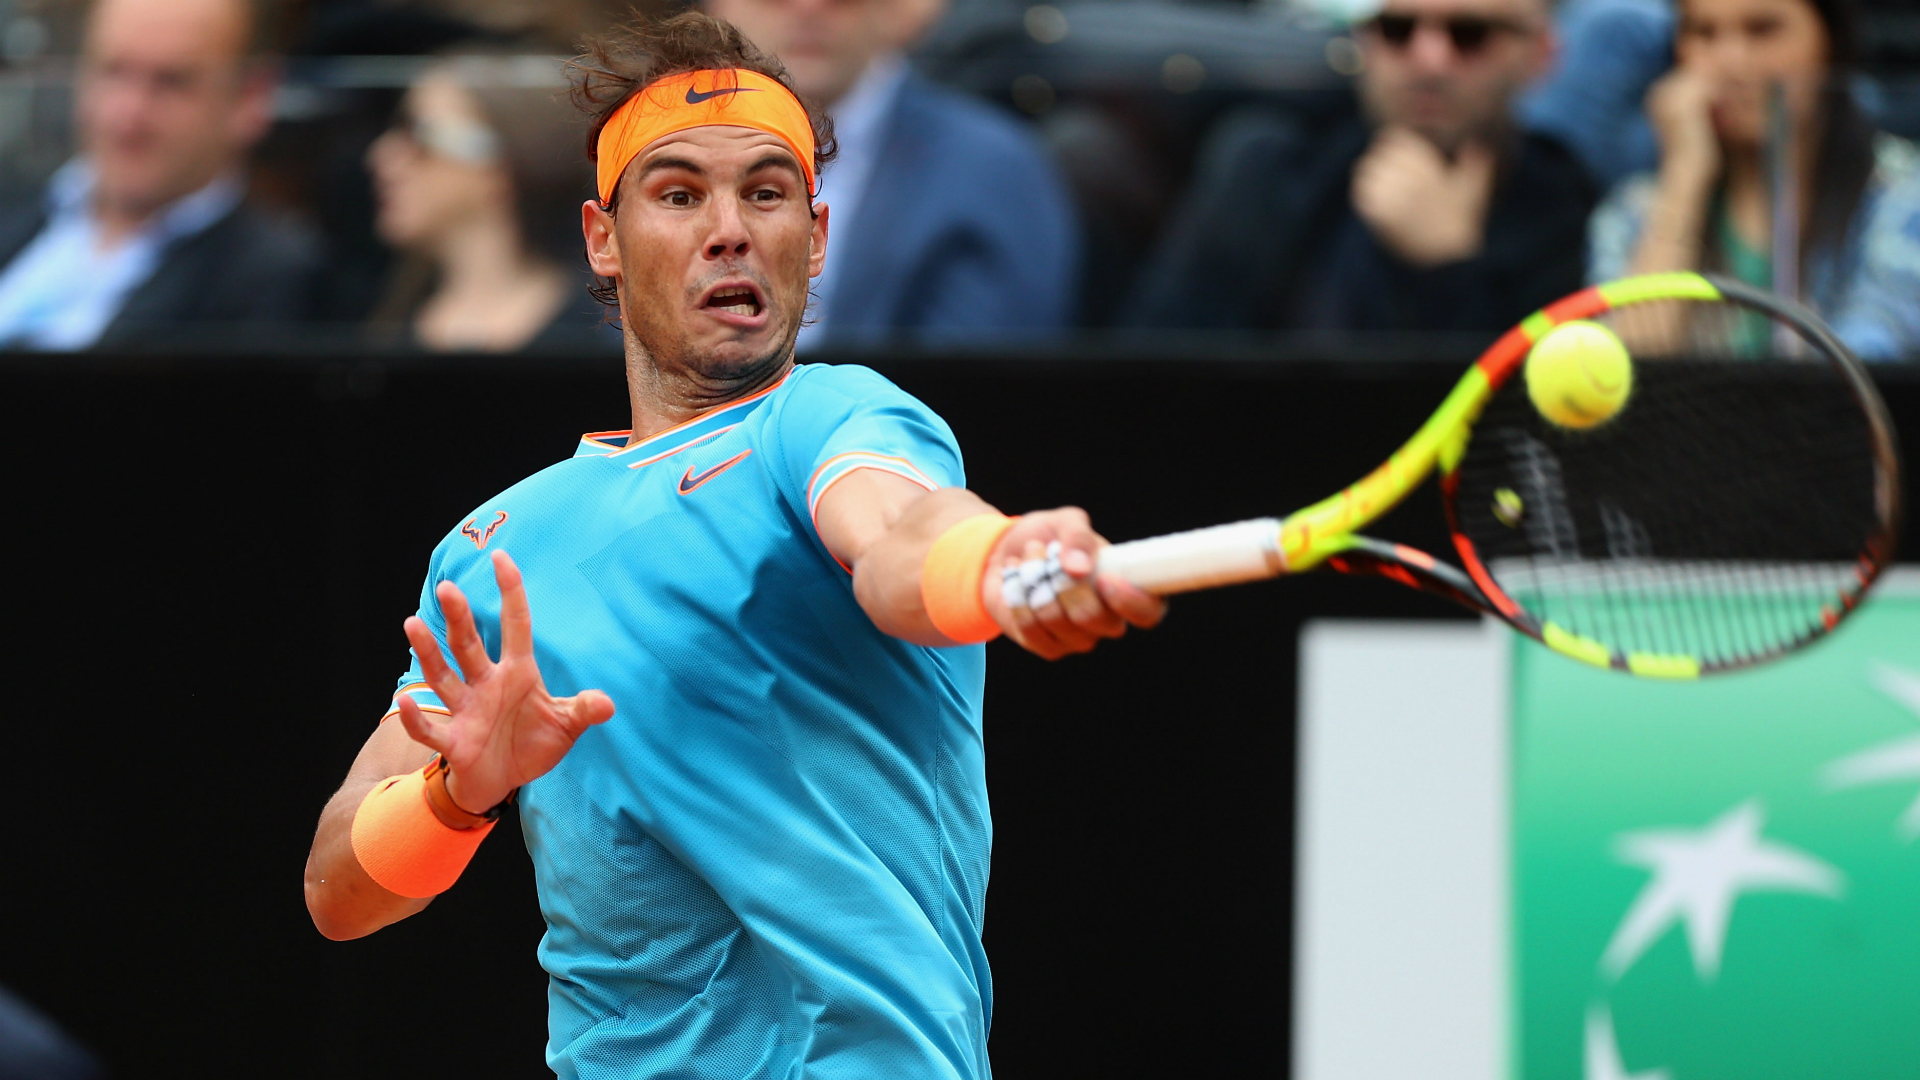 With the French Open fast approaching, Rafael Nadal produced an impressive display to win his Rome semi-final against Stefanos Tsitsipas.